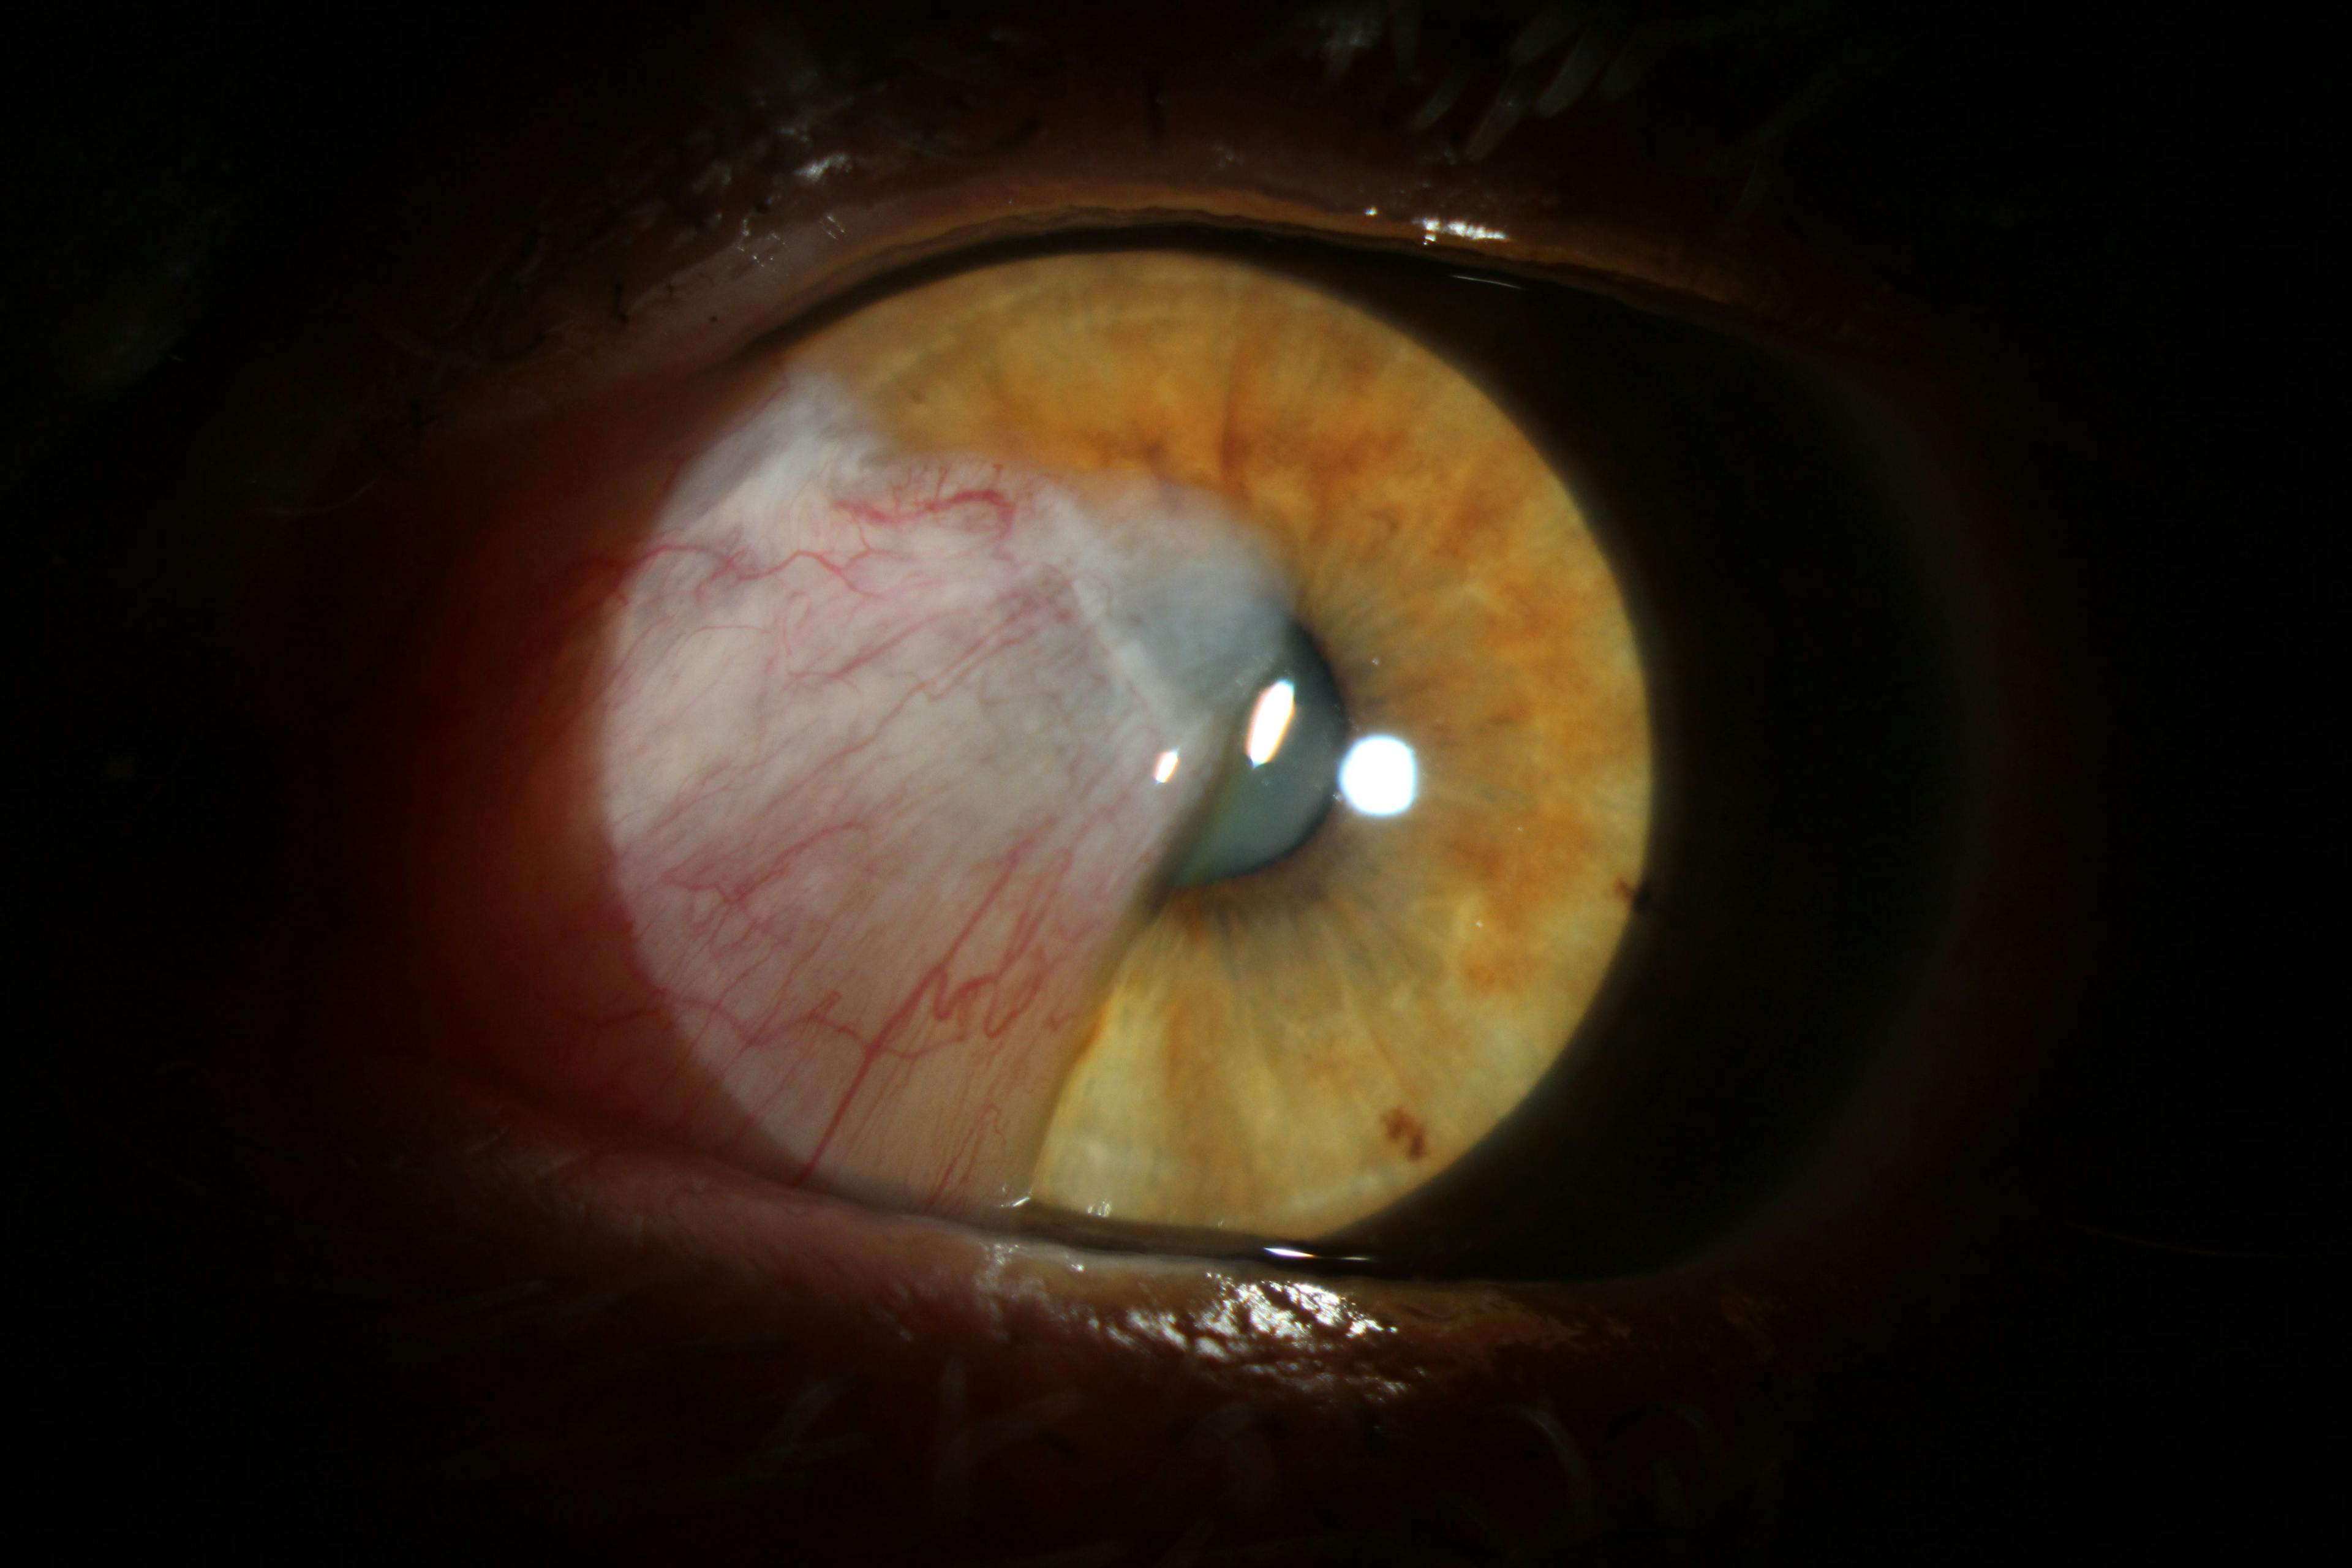 Earlier neurolept anesthesia for laser-assisted cataract surgery: Timing may not be everything